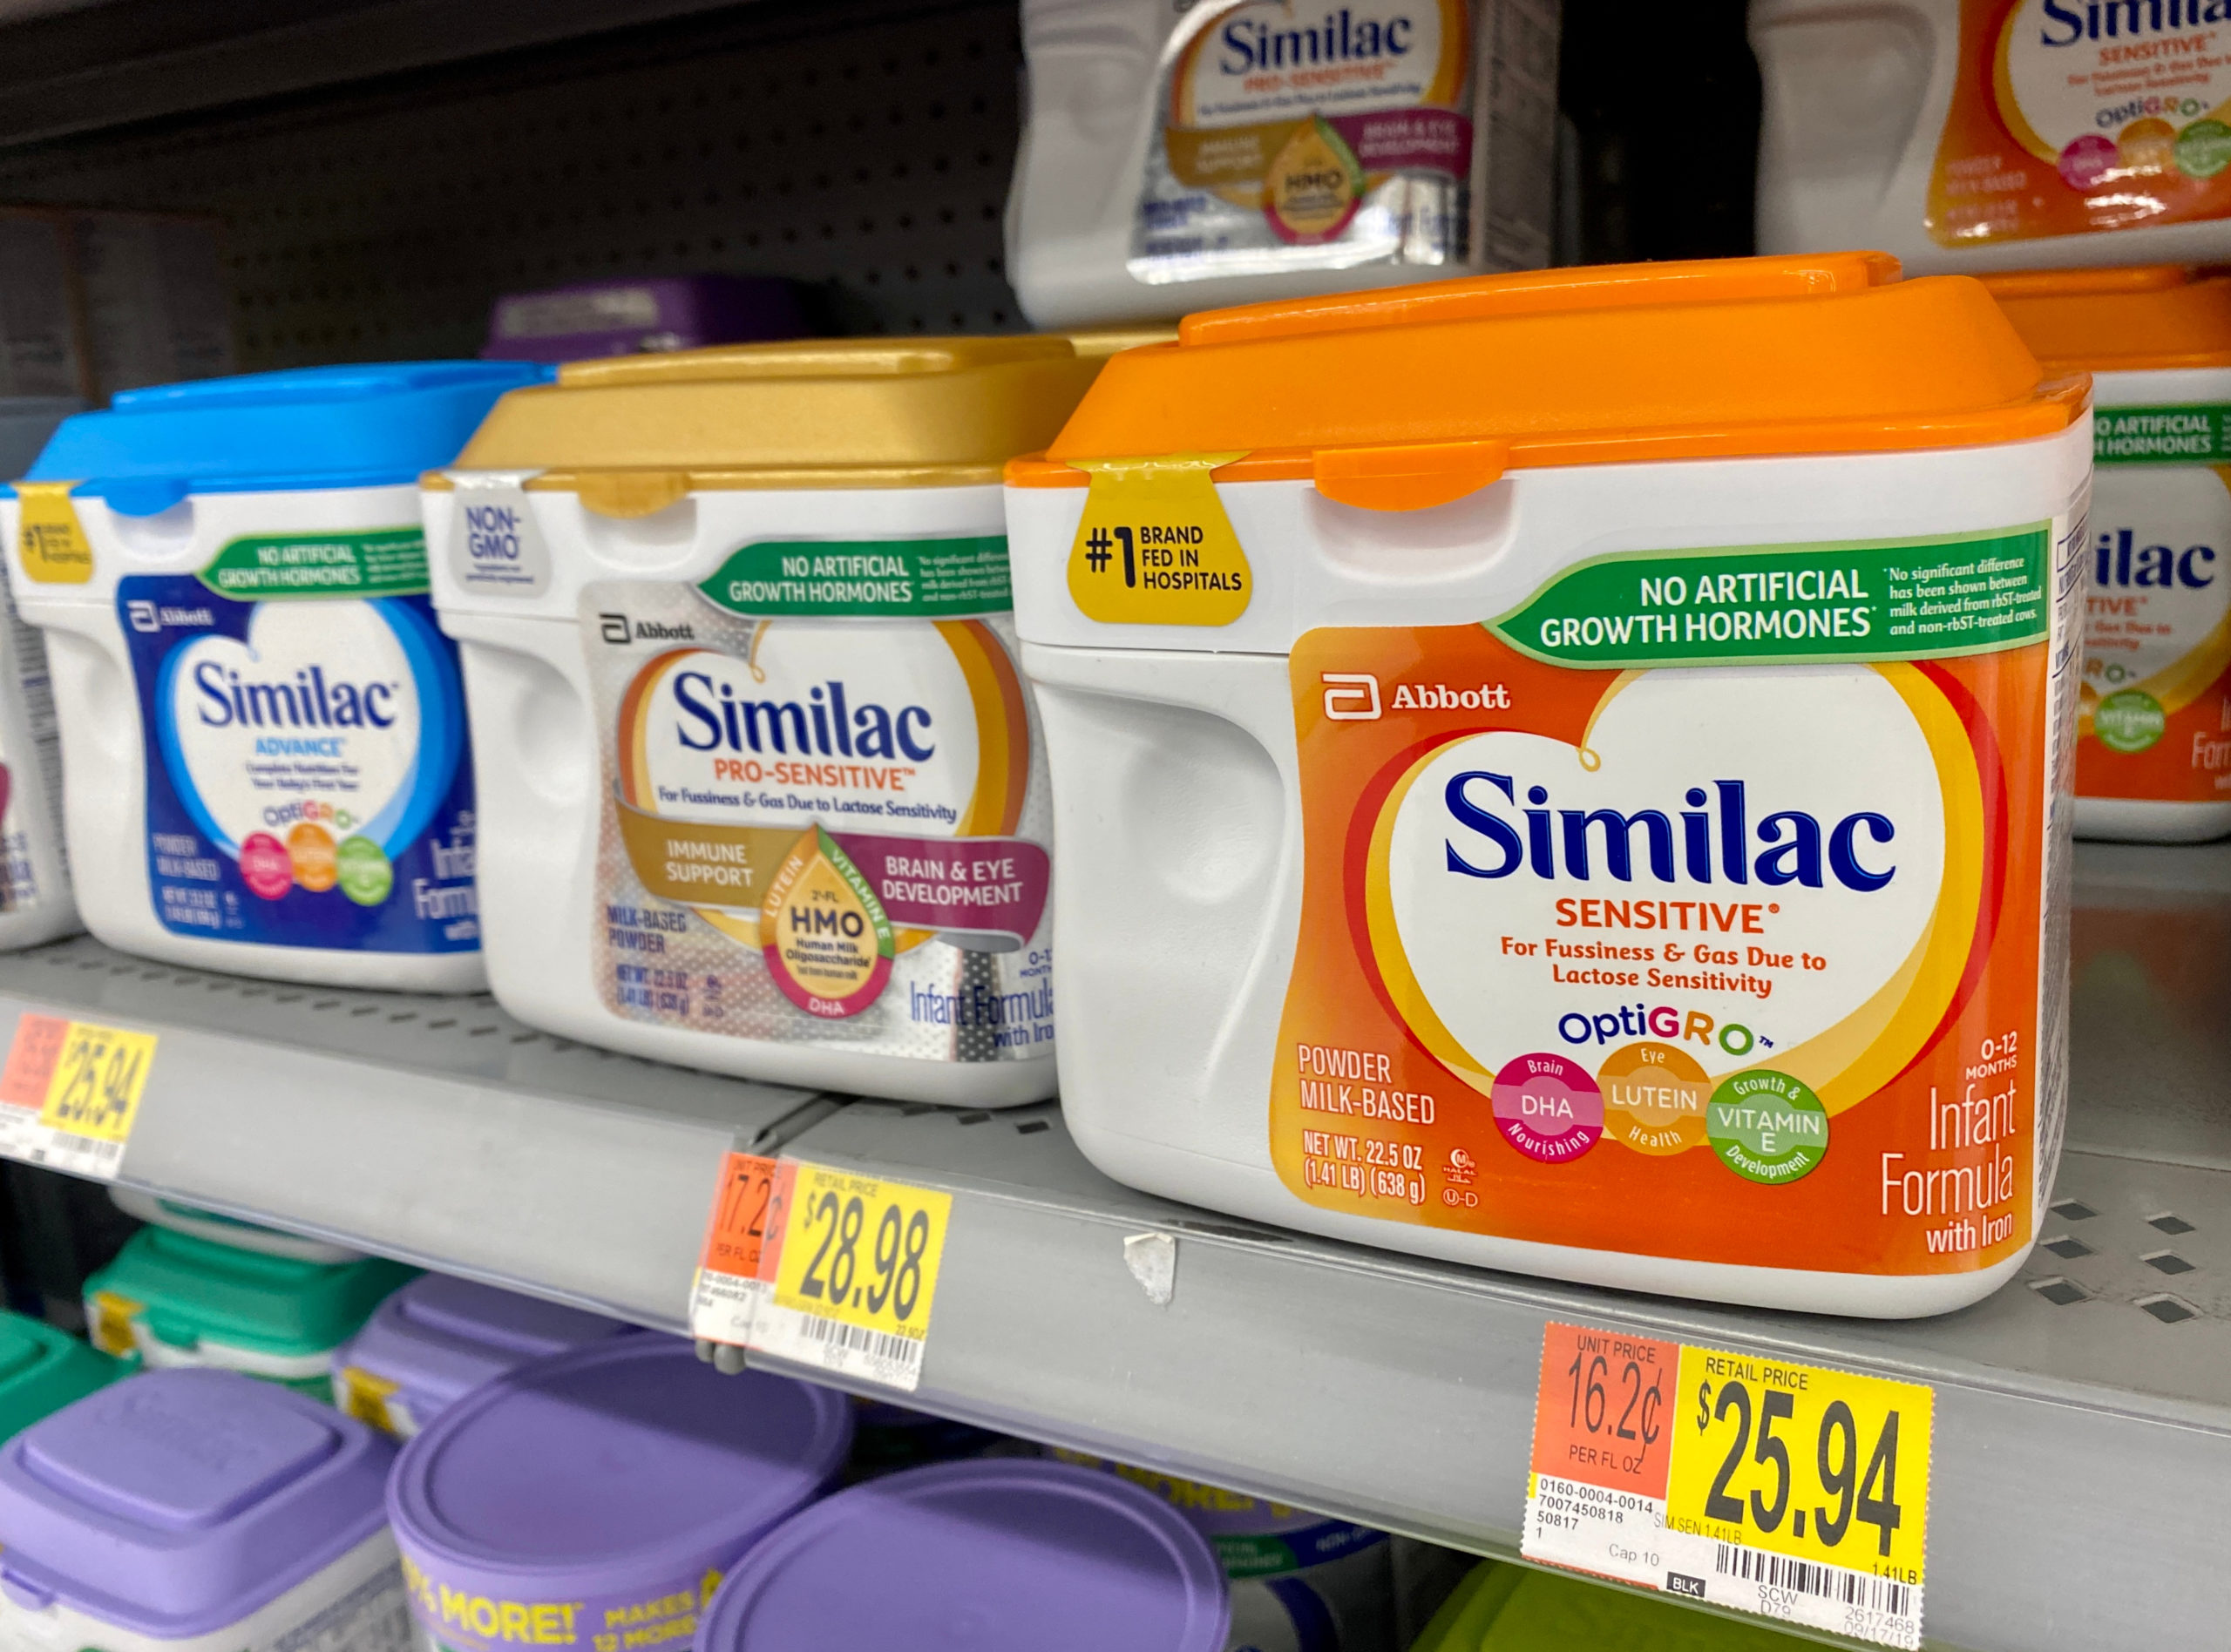 Recall of Similac Infant Formula Leads to Senate Inquiry and